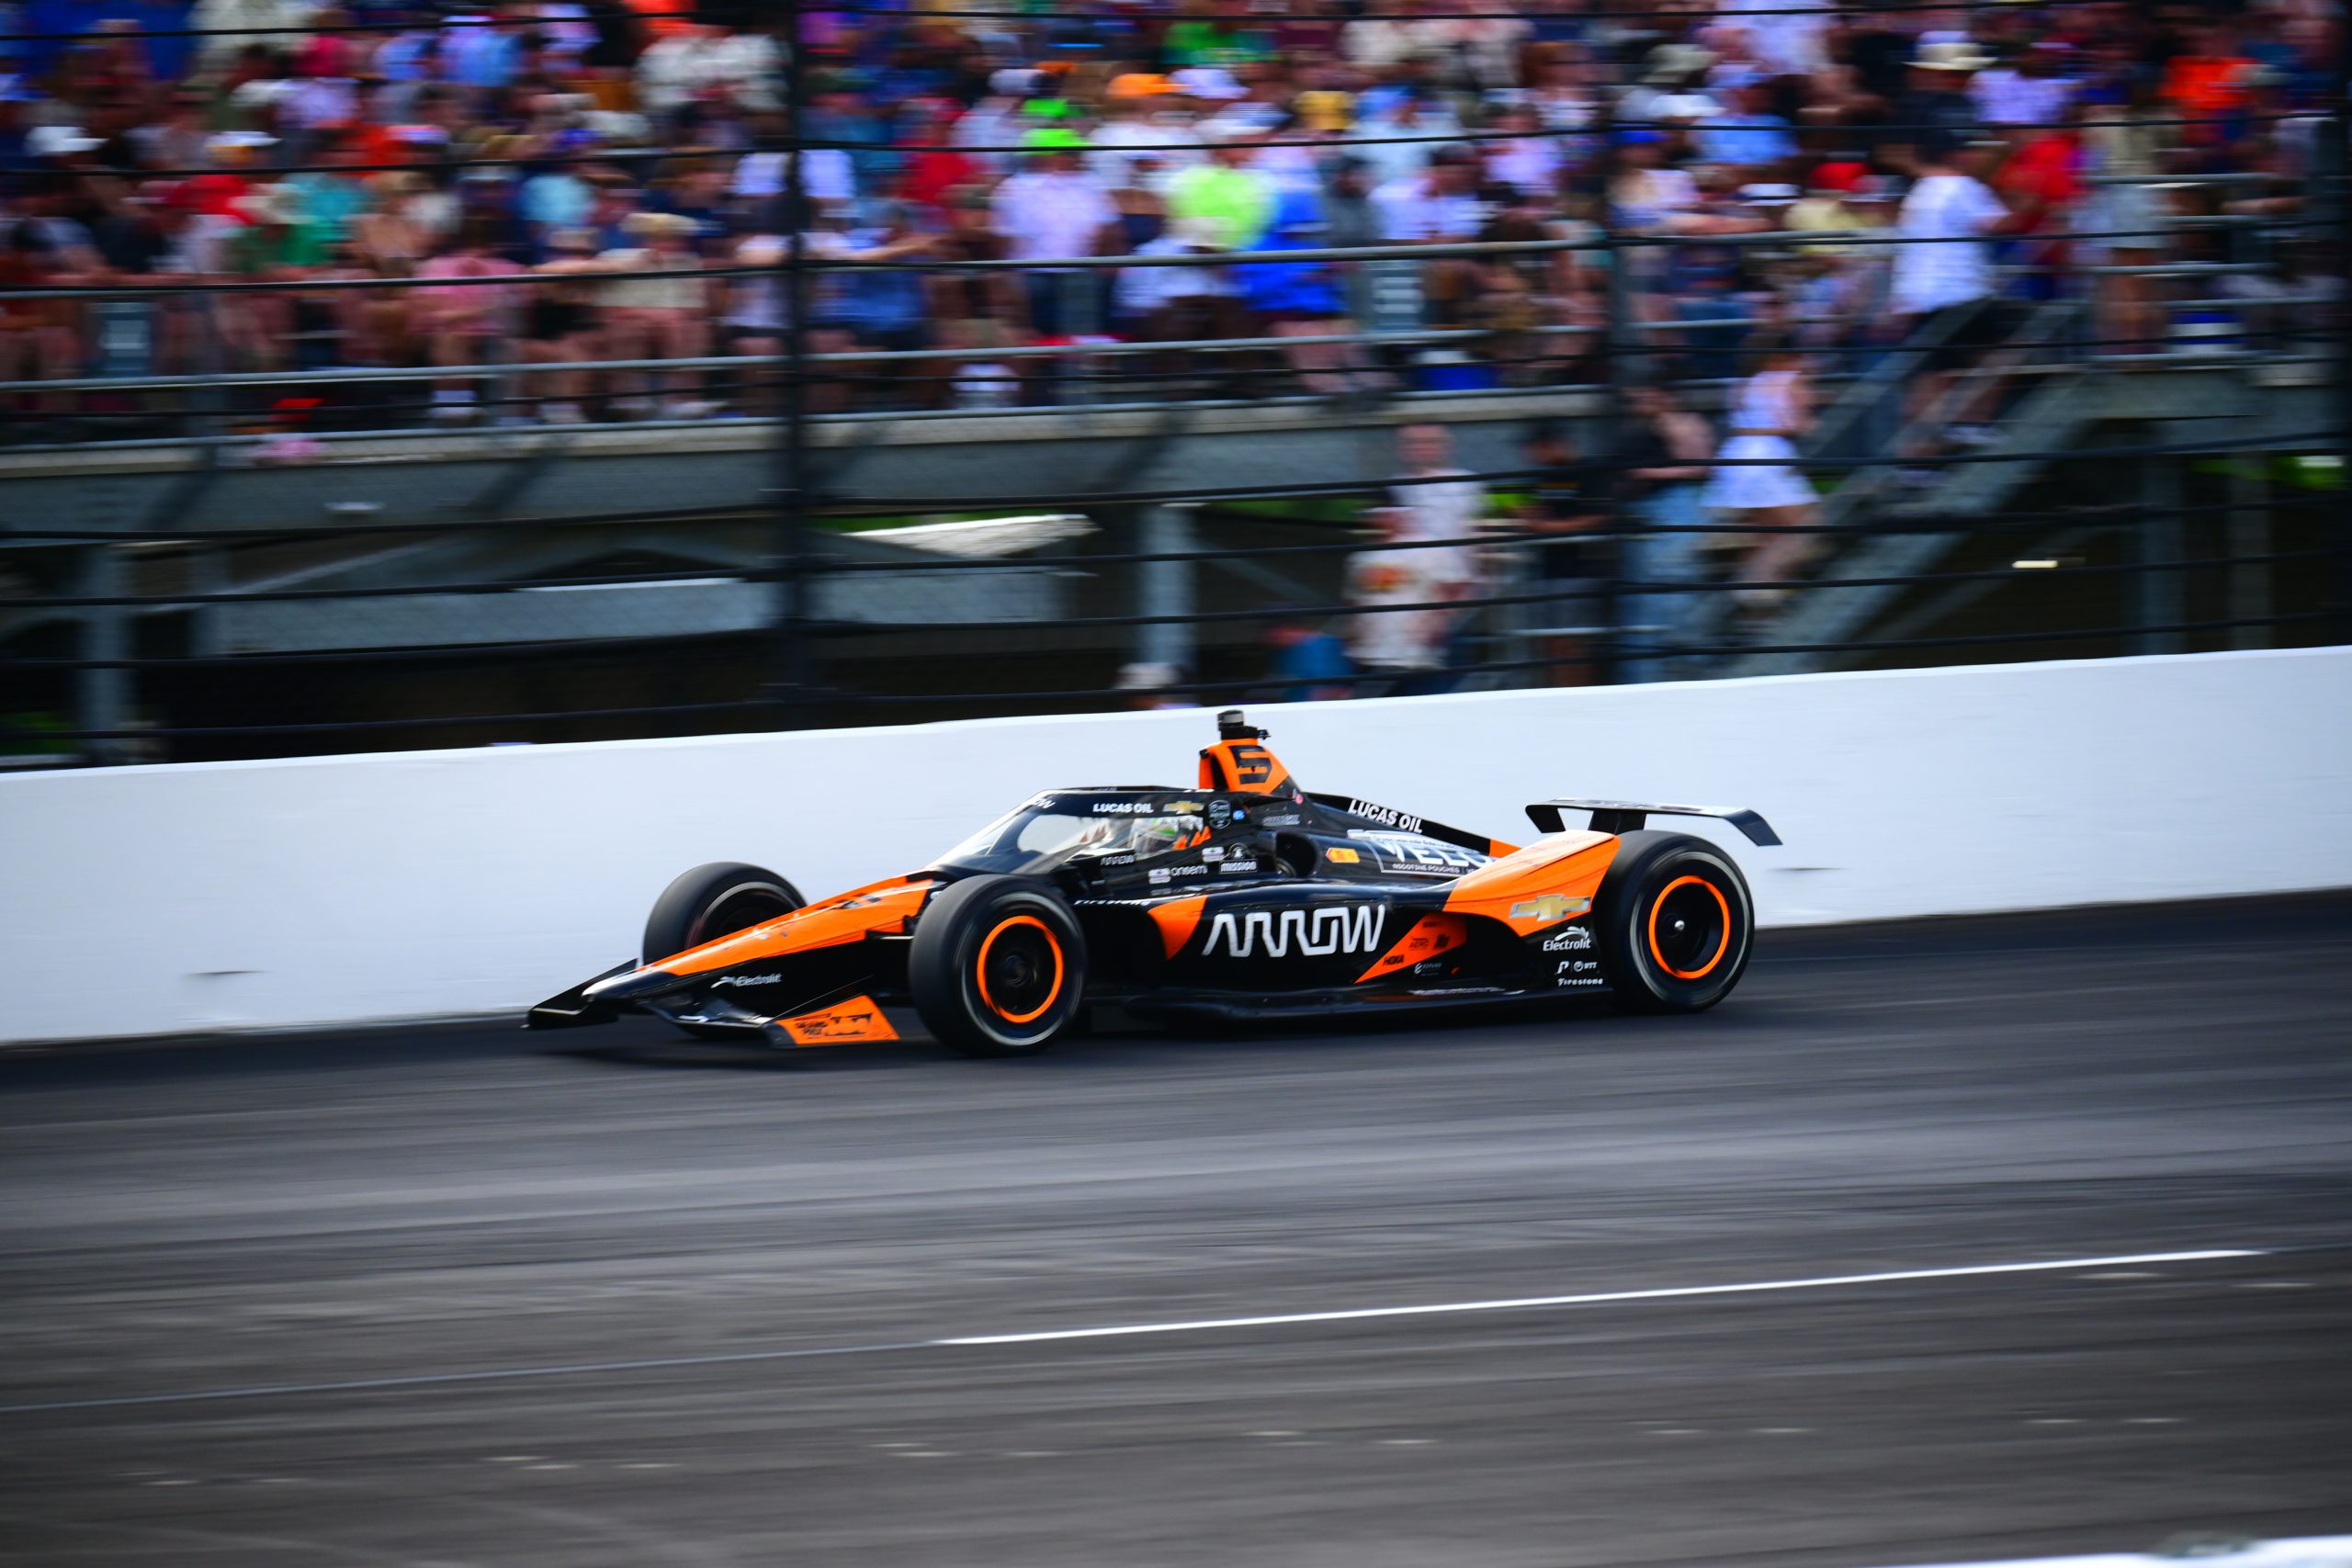 Pato O'Ward raced his heart out in Sunday's Indianapolis 500, only to end up as a runner-up once again. (Photo: Katherine Miller | The Podium Finish)